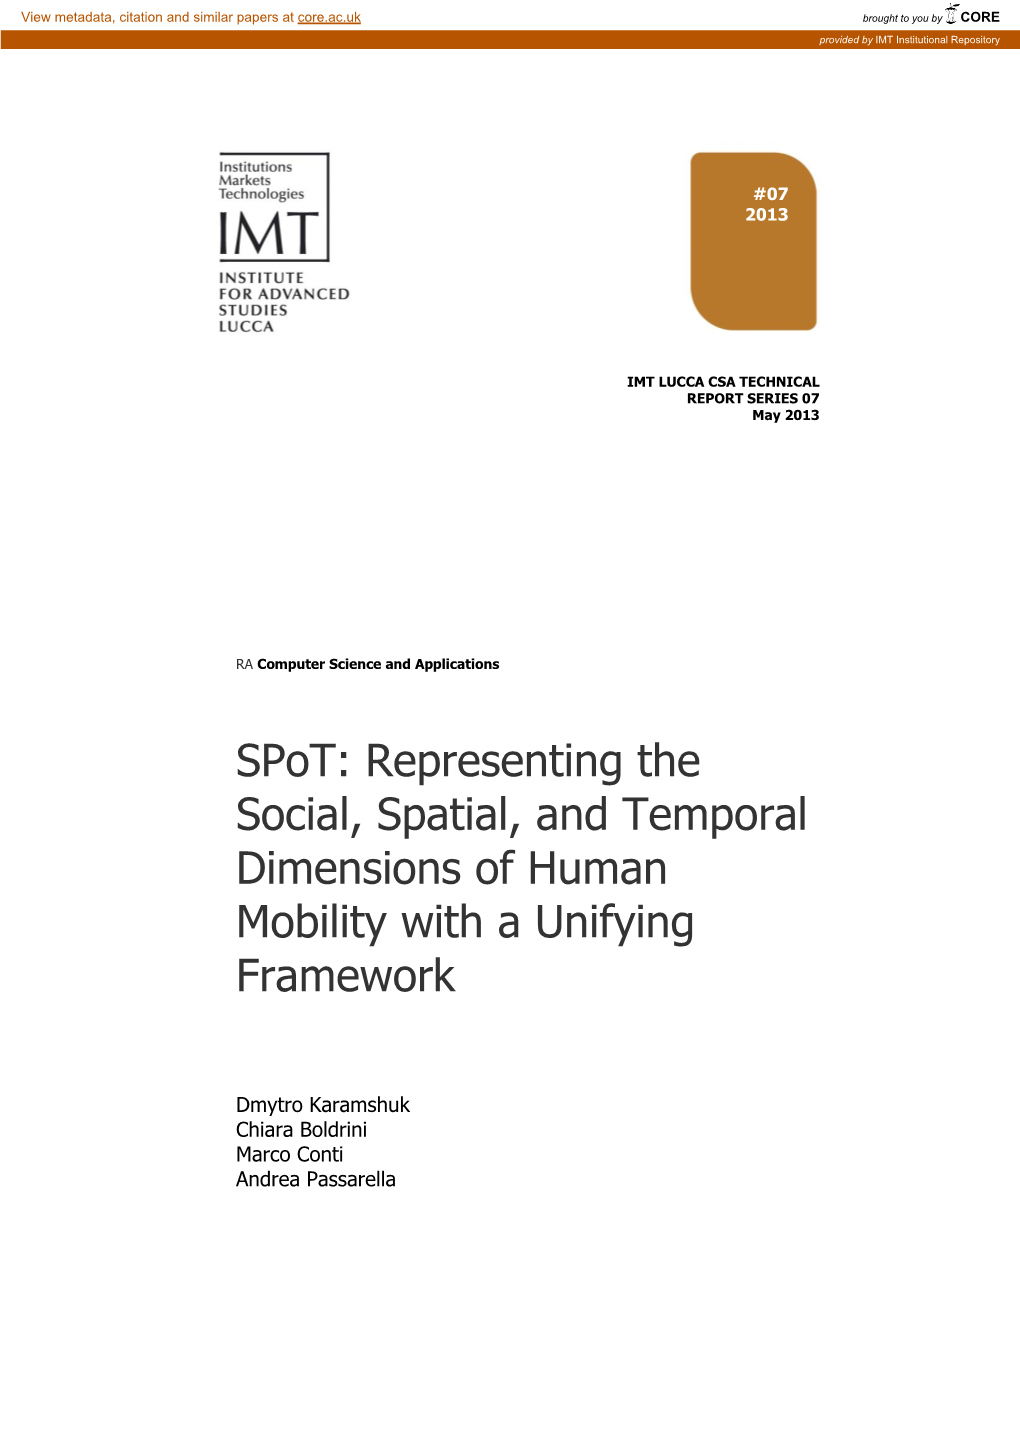 Spot: Representing the Social, Spatial, and Temporal Dimensions of Human Mobility with A